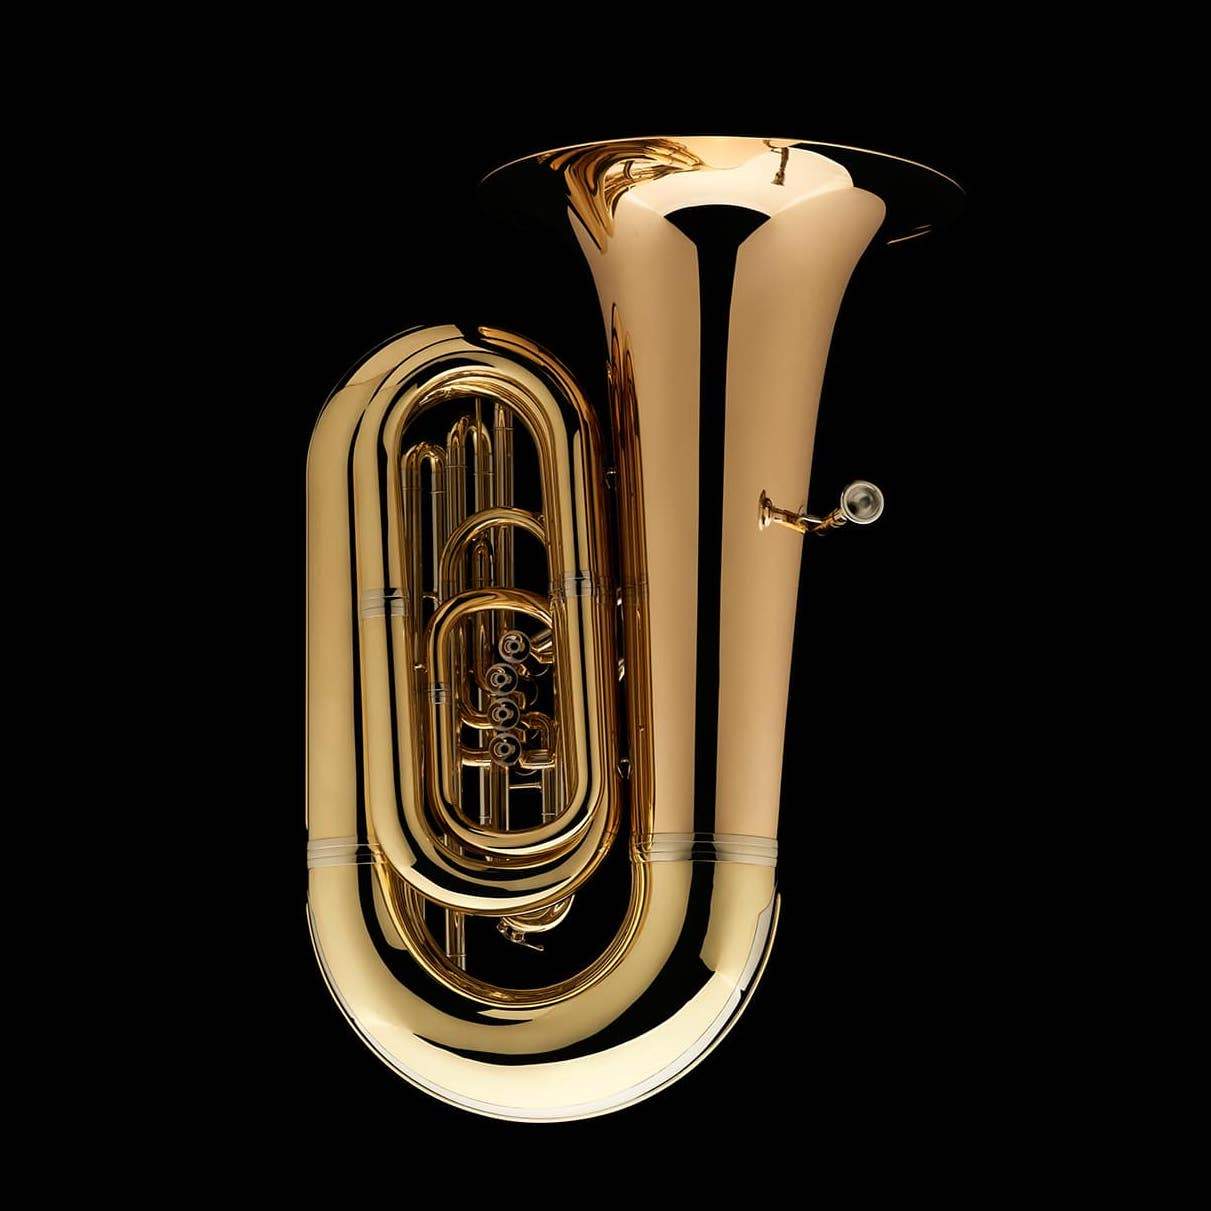 An image of the side of a BBb 6/4 Front-Piston Tuba "Grand" from Wessex Tubas